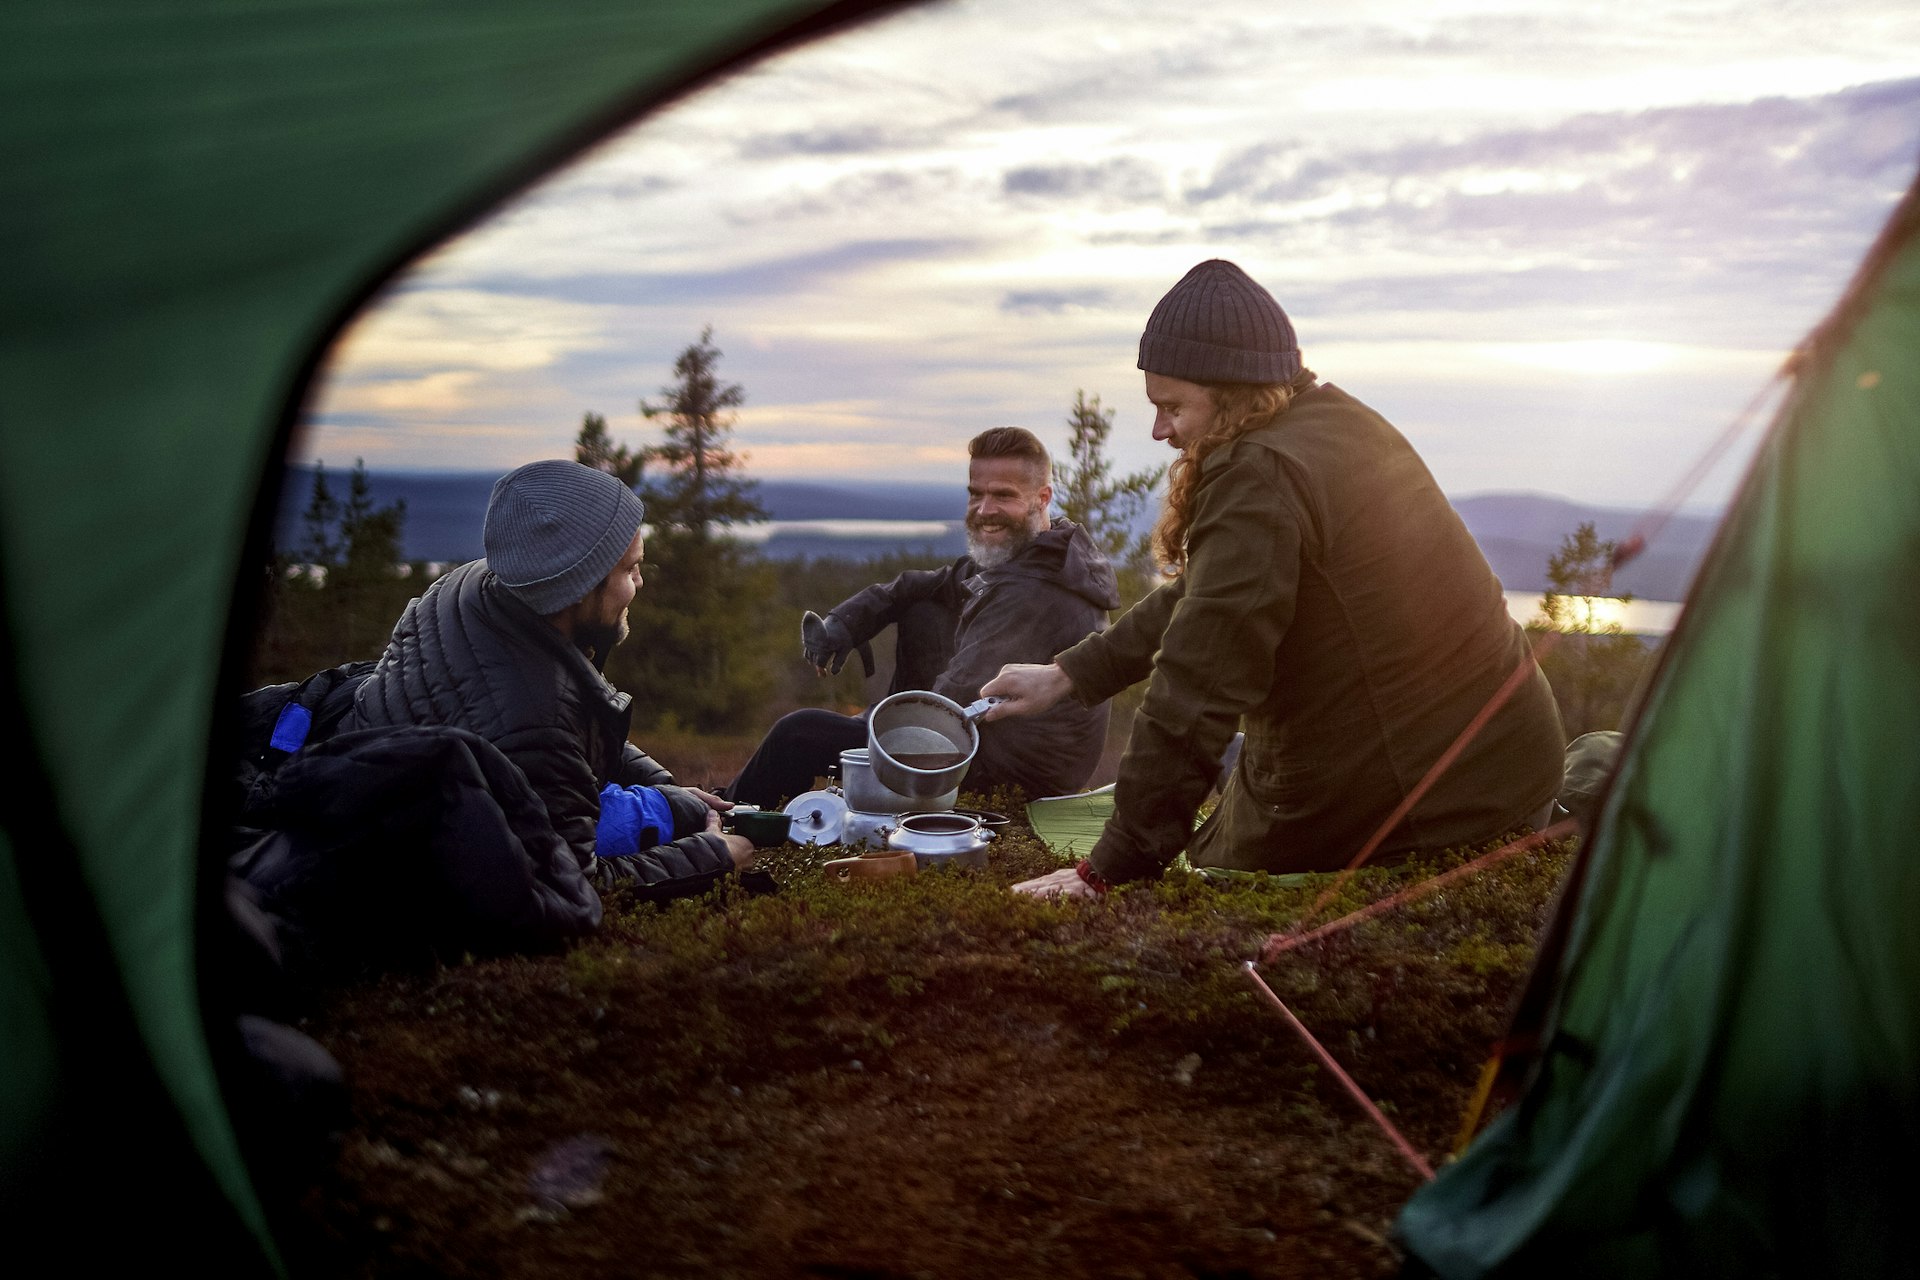 Three male hikers prepare a meal in front of tent in Lapland, Finland